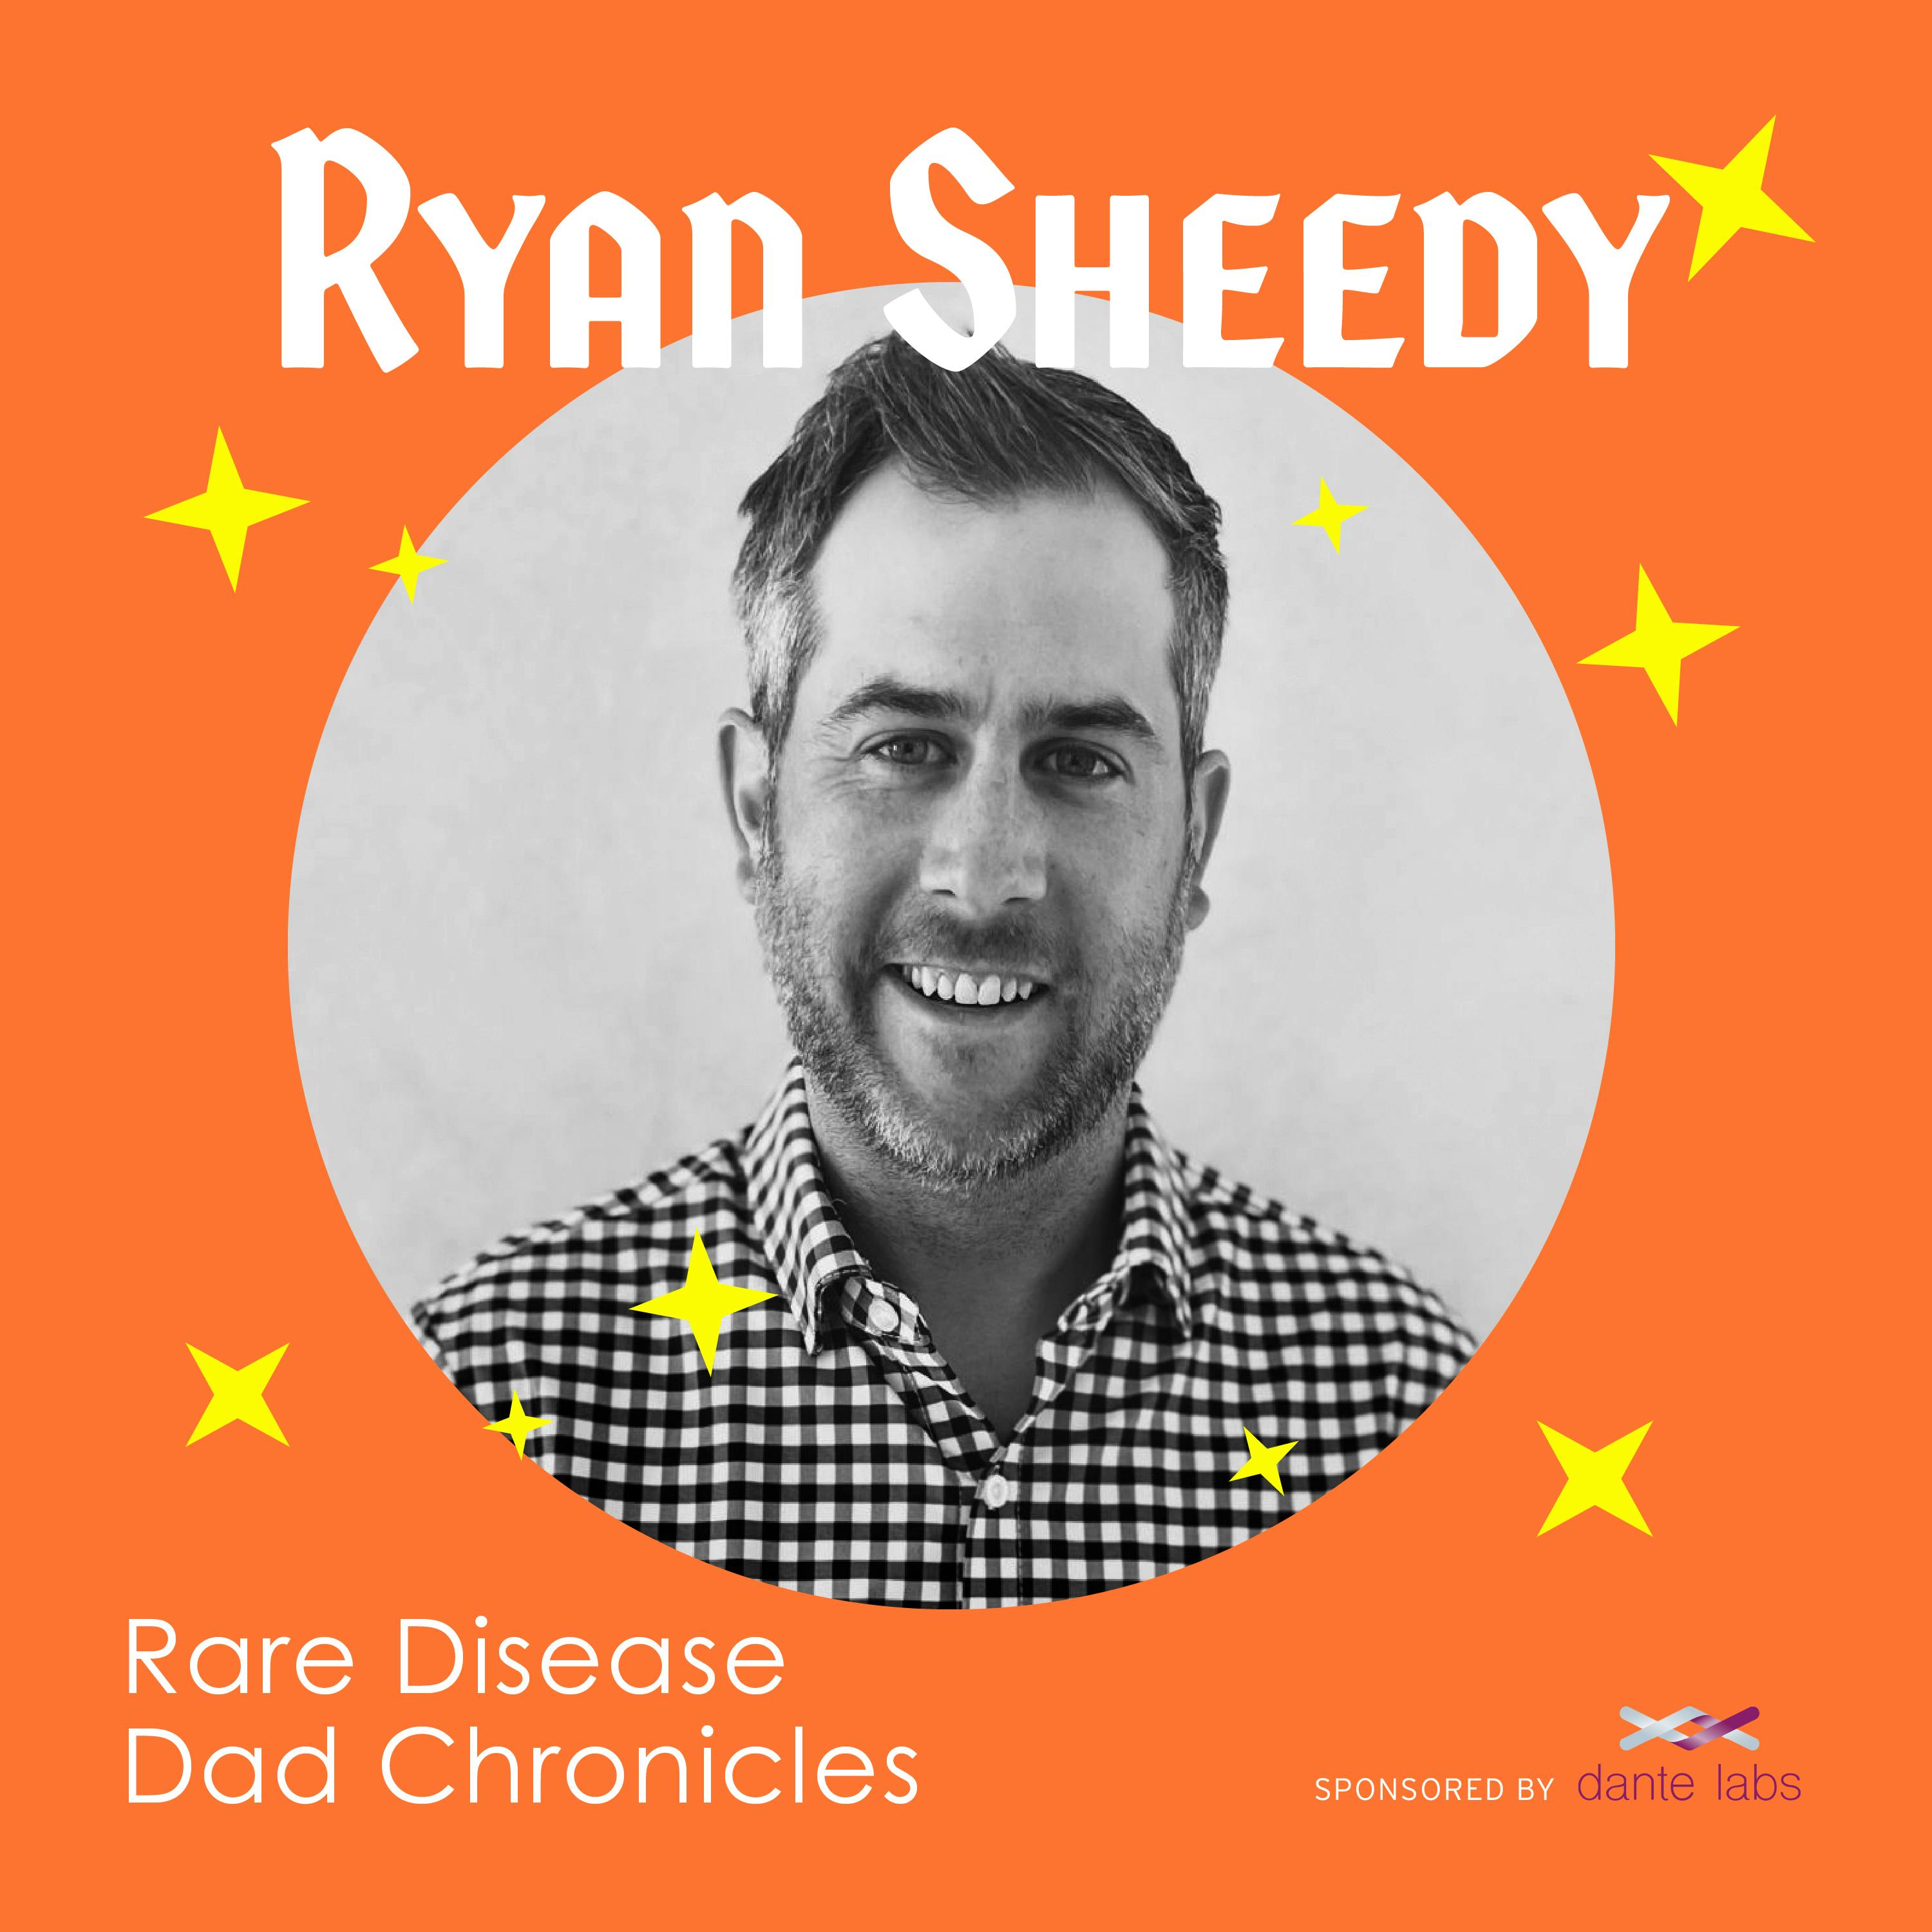 Rare Disease Dad Chronicles - From Stay-At-Home Fatherhood to My Mejo Co-Founder A Journey Through Costello Syndrome and Parenthood Challenges with Dadvocate - Ryan Sheedy